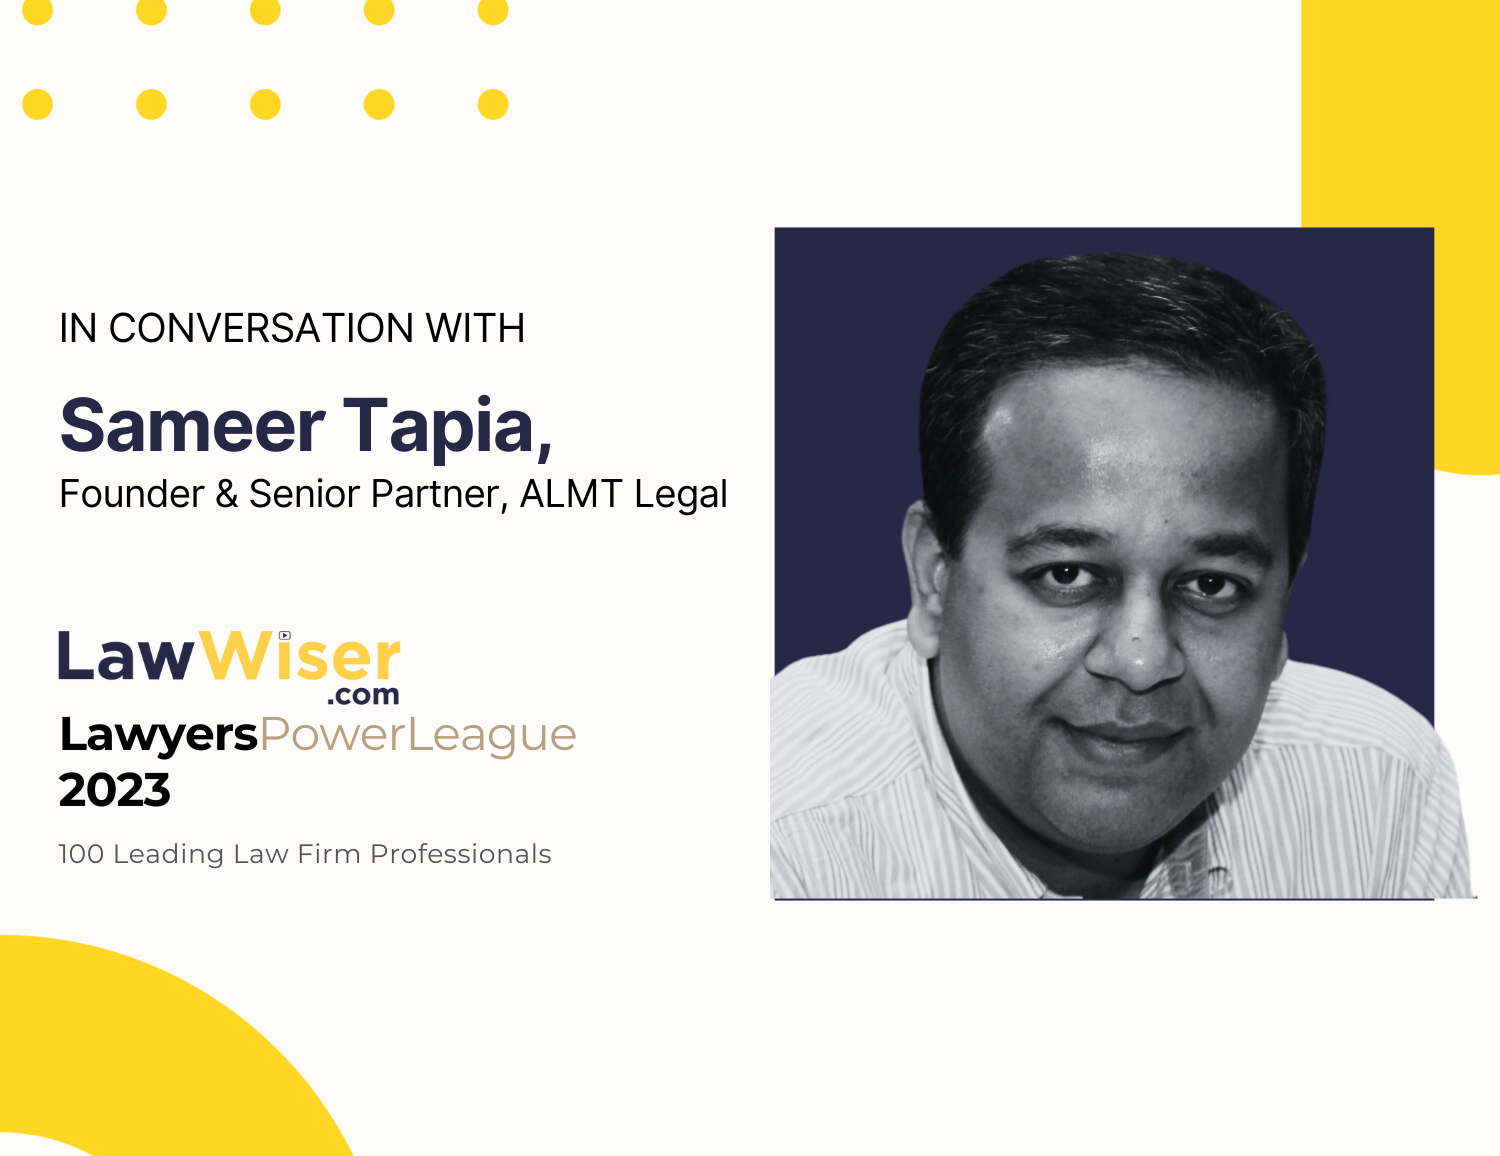 In Conversation with Sameer Tapia of ALMT Legal